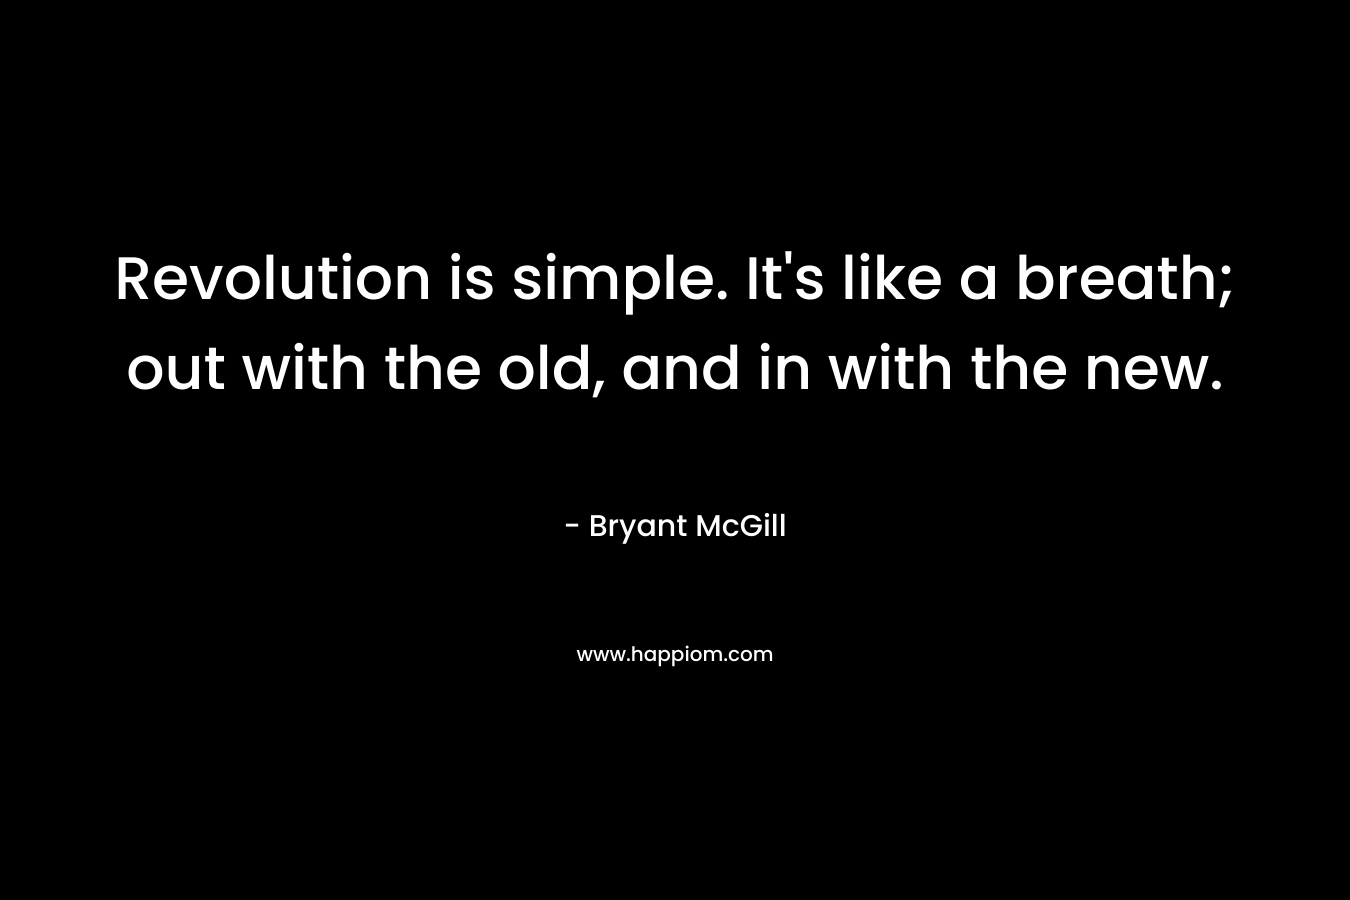 Revolution is simple. It's like a breath; out with the old, and in with the new.